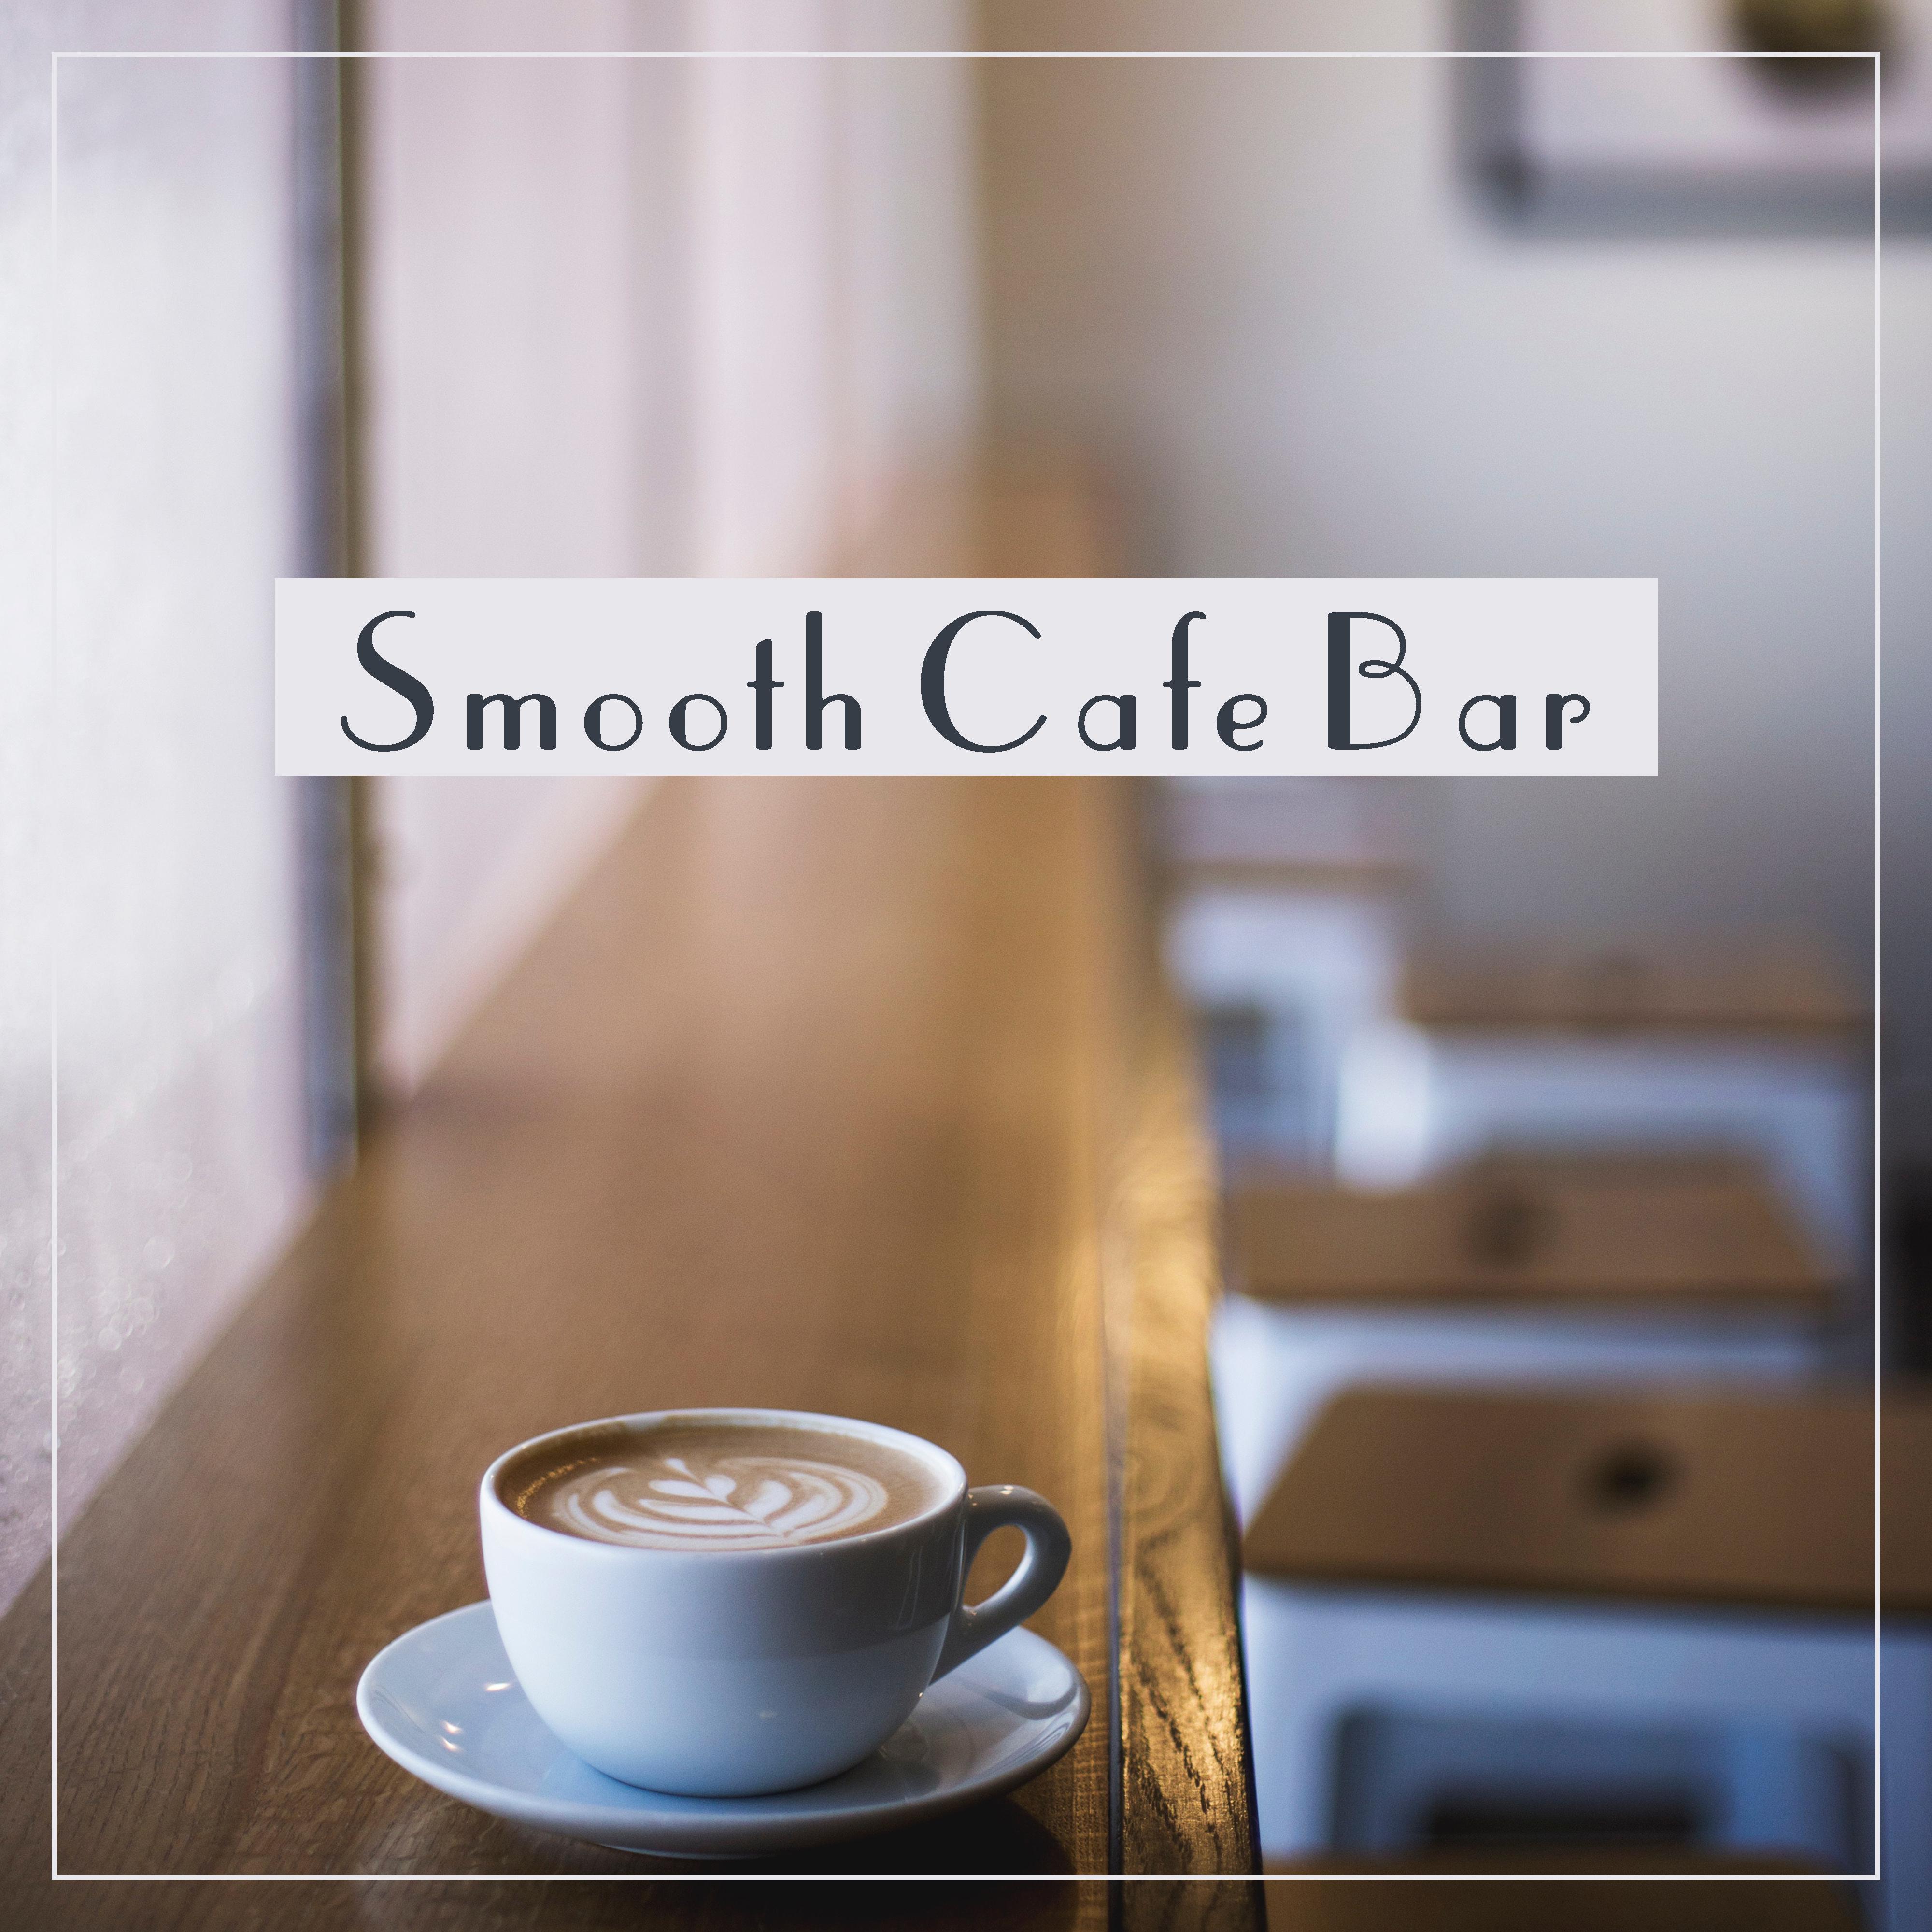 Smooth Cafe Bar – Instrumental Songs to Rest, Piano Bar, Coffee Talk, Jazz Cafe, Calm Down